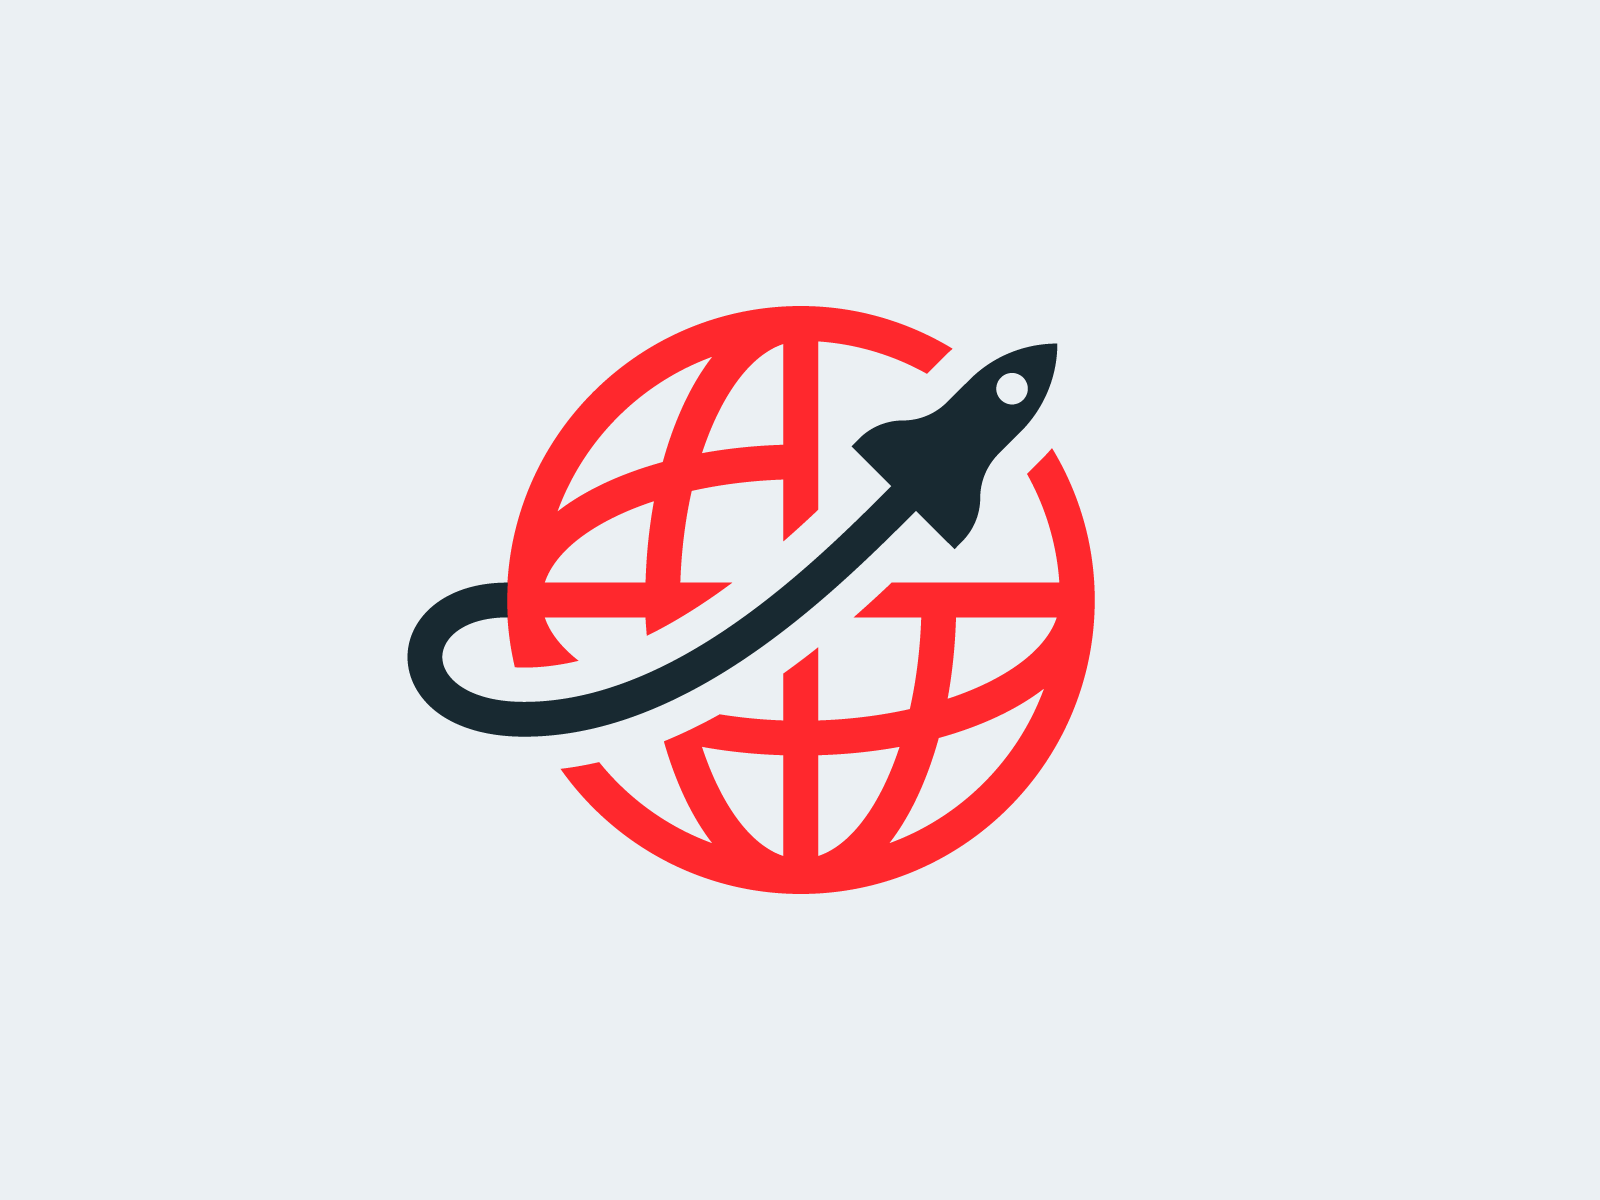 Minimal logo featuring a globe with a rocket